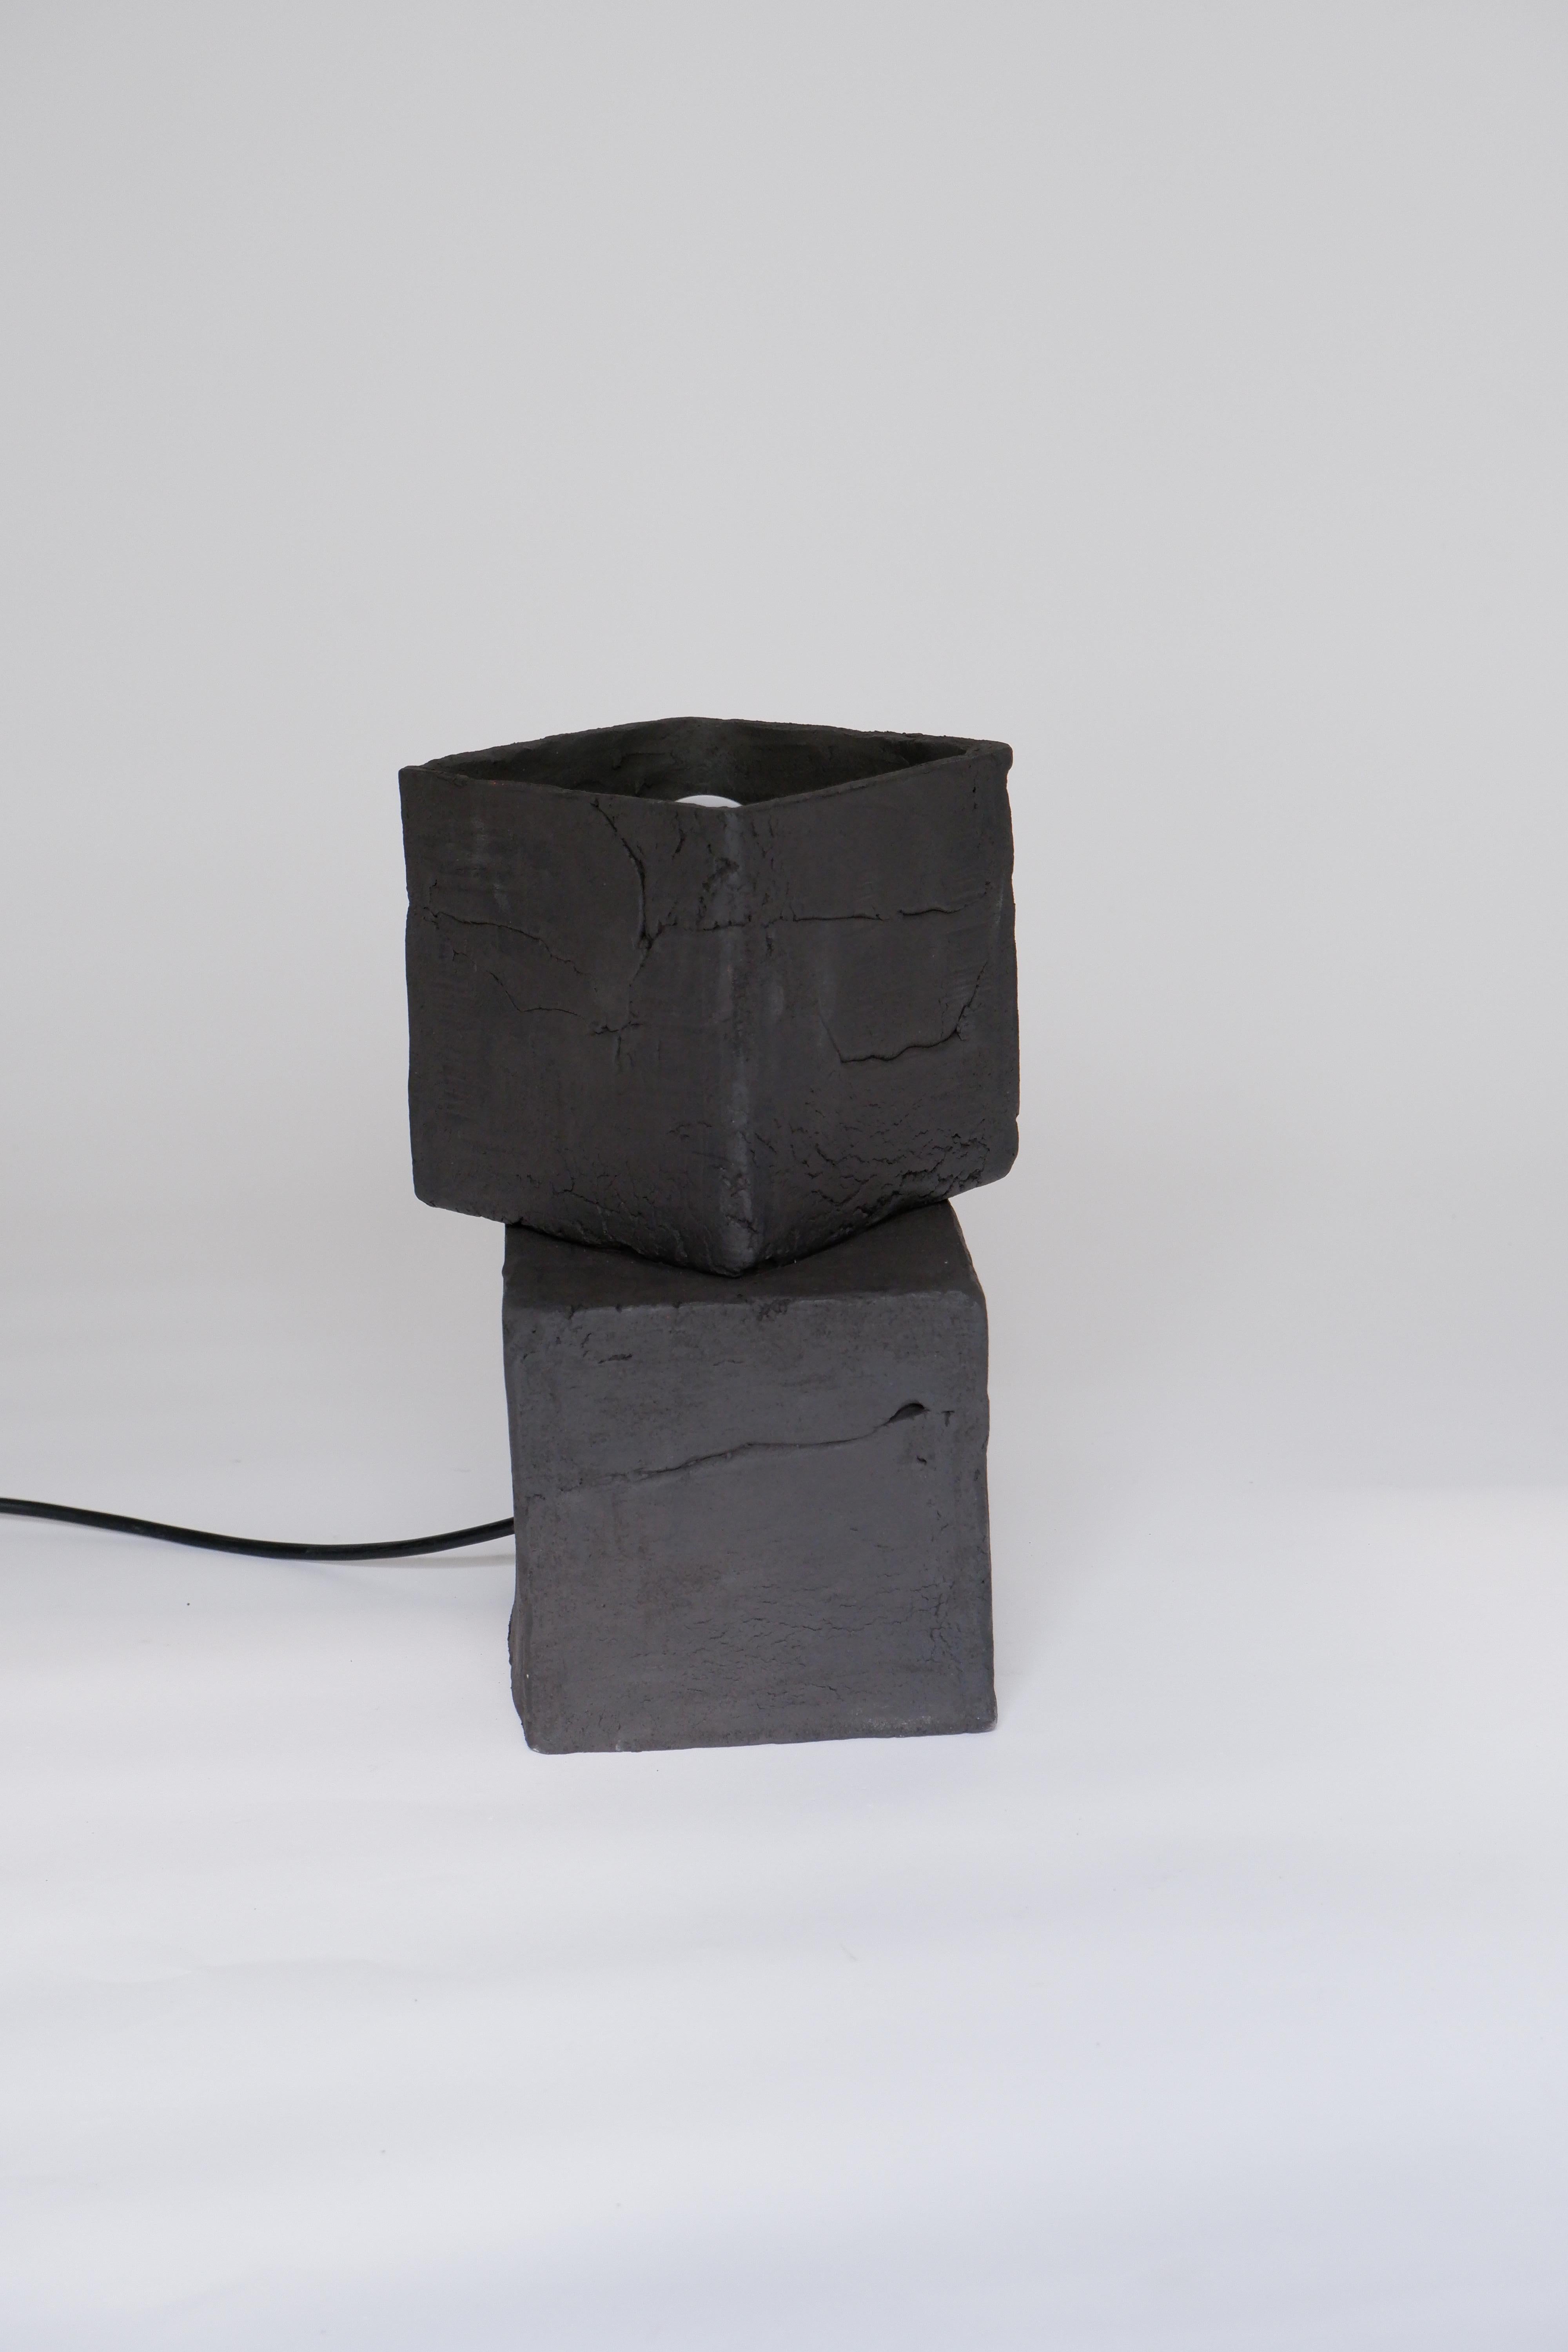 Twist Table Lamp by Ia Kutateladze
One Of A Kind.
Dimensions: D 20 x W 18 x H 26 cm.
Materials: Clay.

Each piece is one of a kind, due to its free hand-building process. Different color variations available: raw black clay, raw white clay and raw